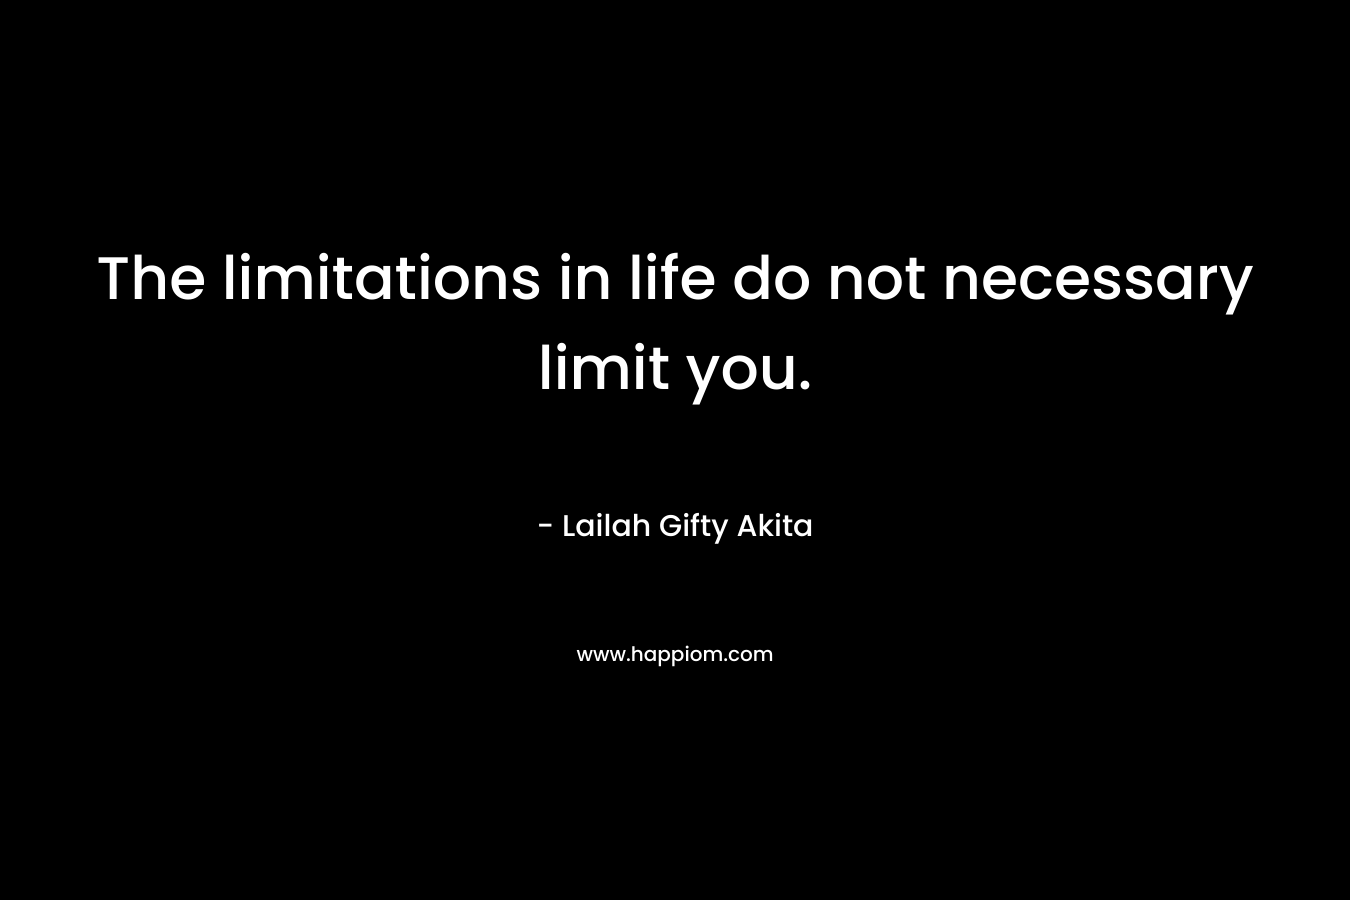 The limitations in life do not necessary limit you.